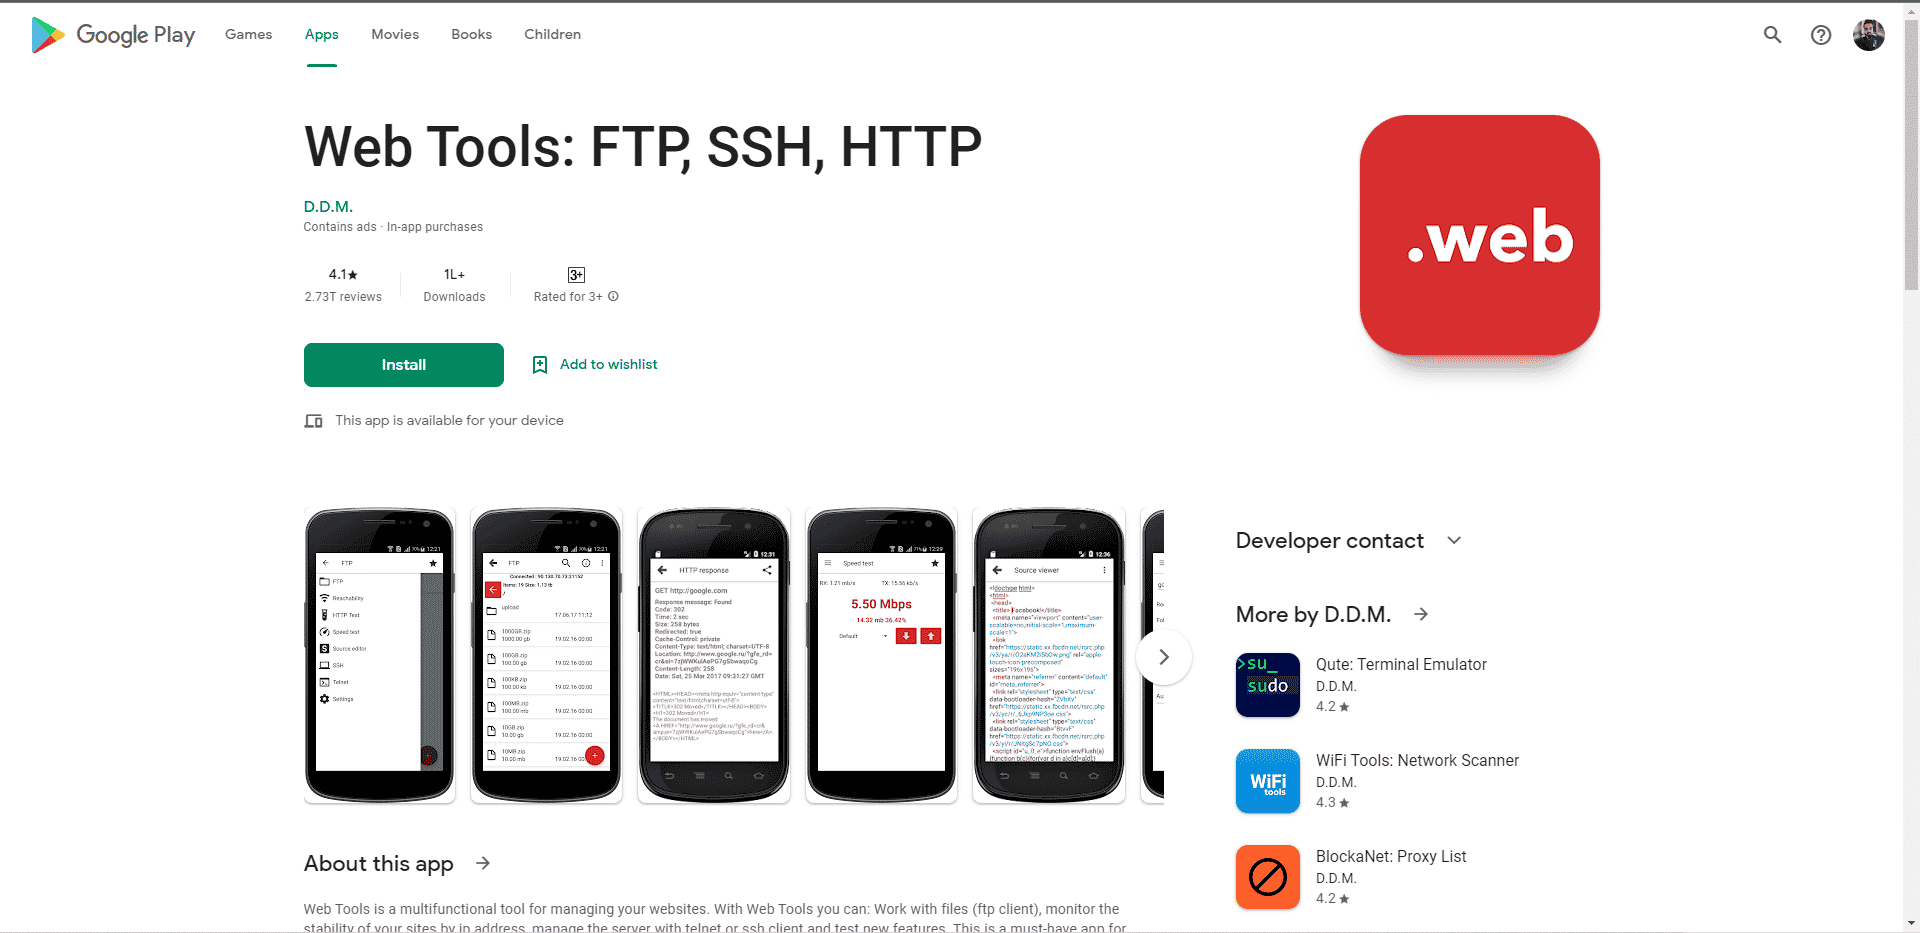 Web Tools FTP SSH HTTP Play Store homepage. Best File Transfer Protocol Clients for Android